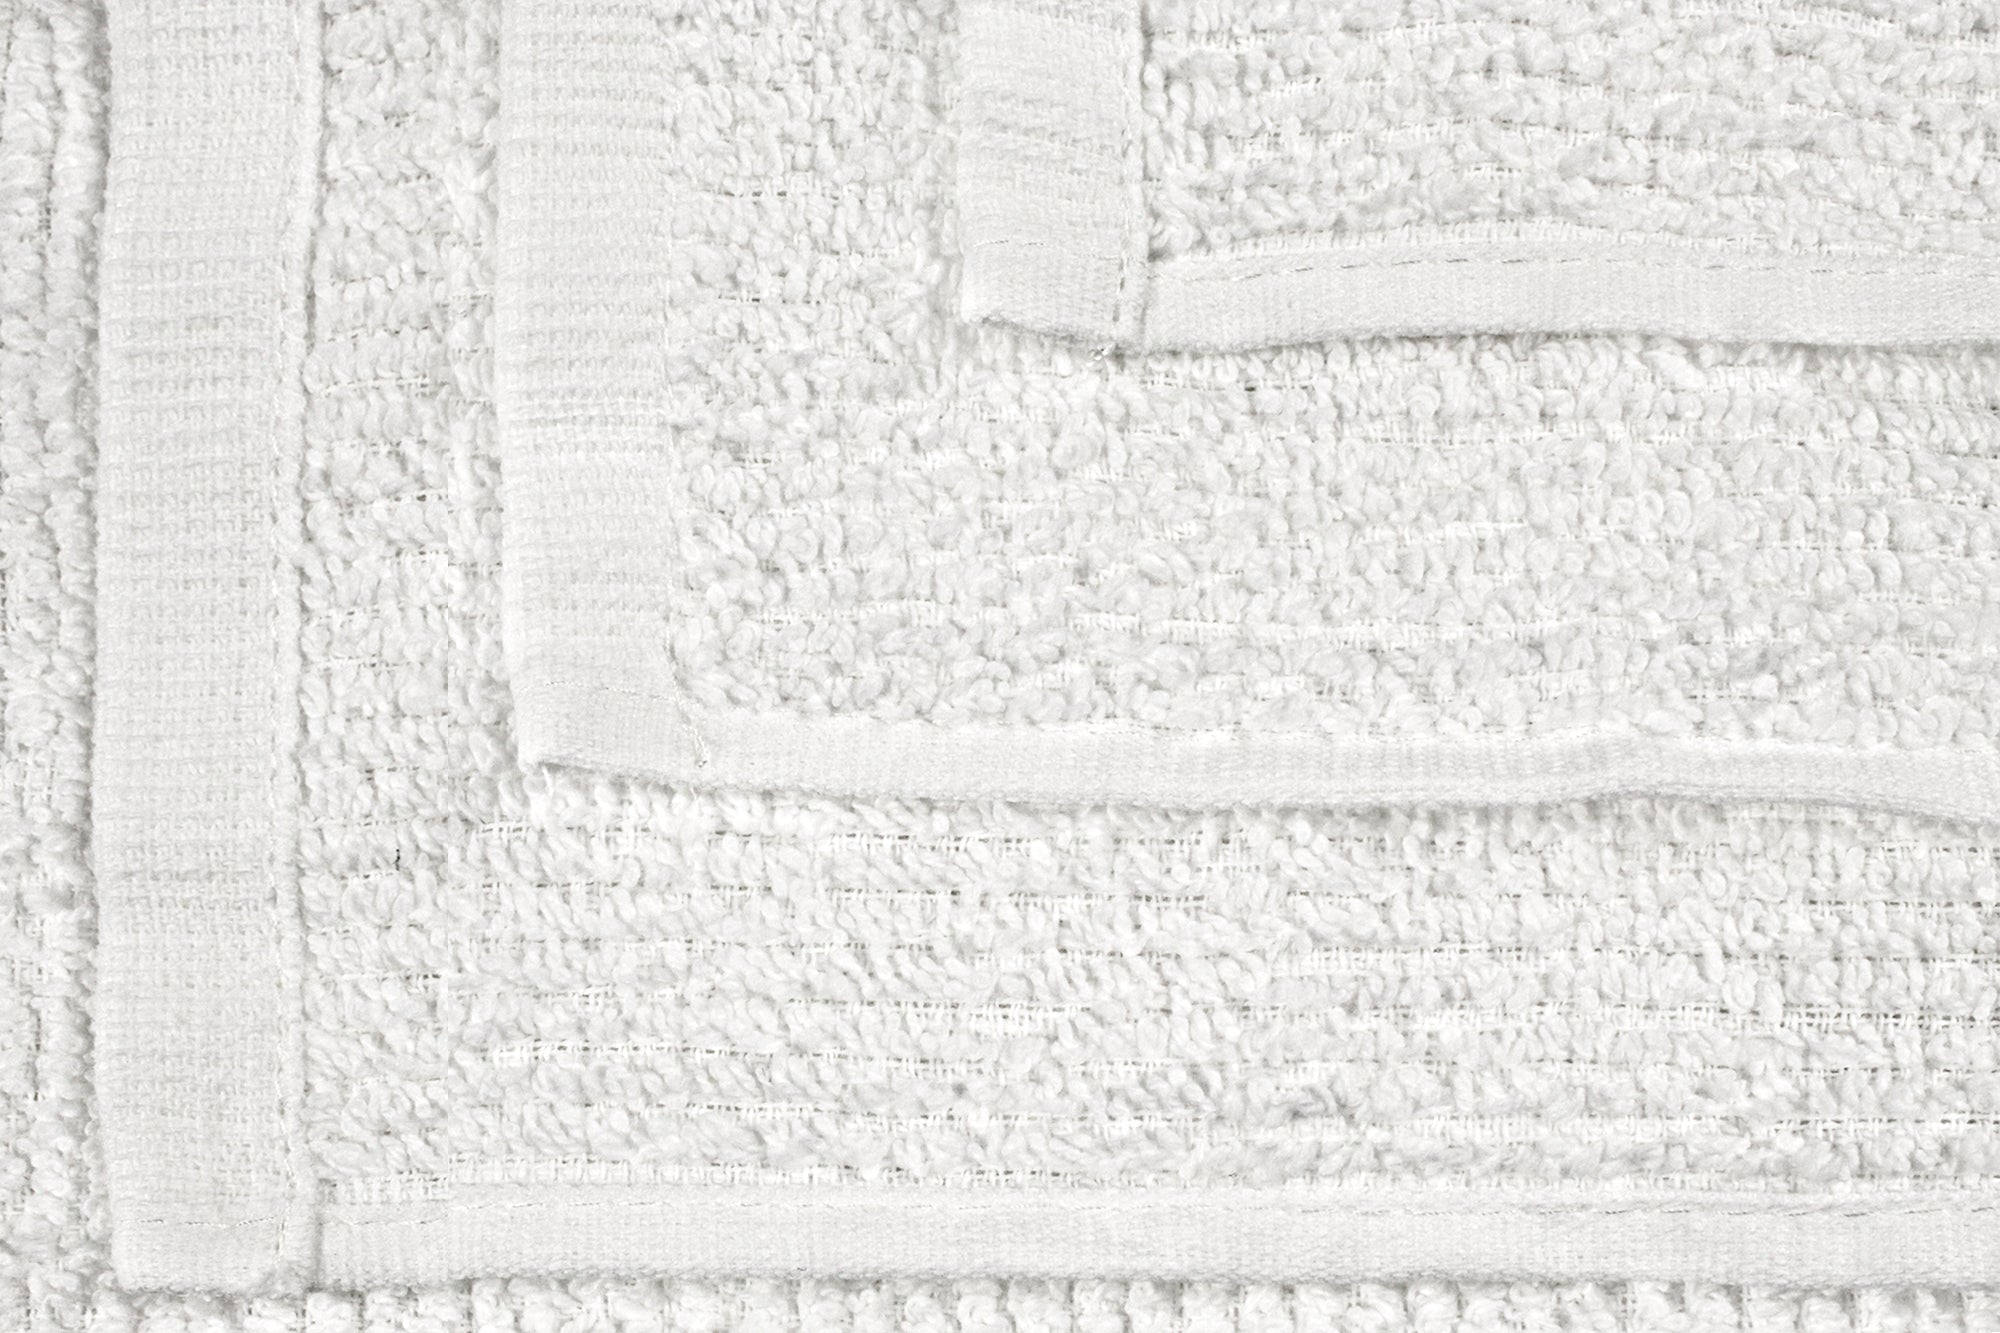 Nouvelle Legende Ribbed Cotton Bar Mop Towels, 16 x 19 Inches, White, Pack of 12